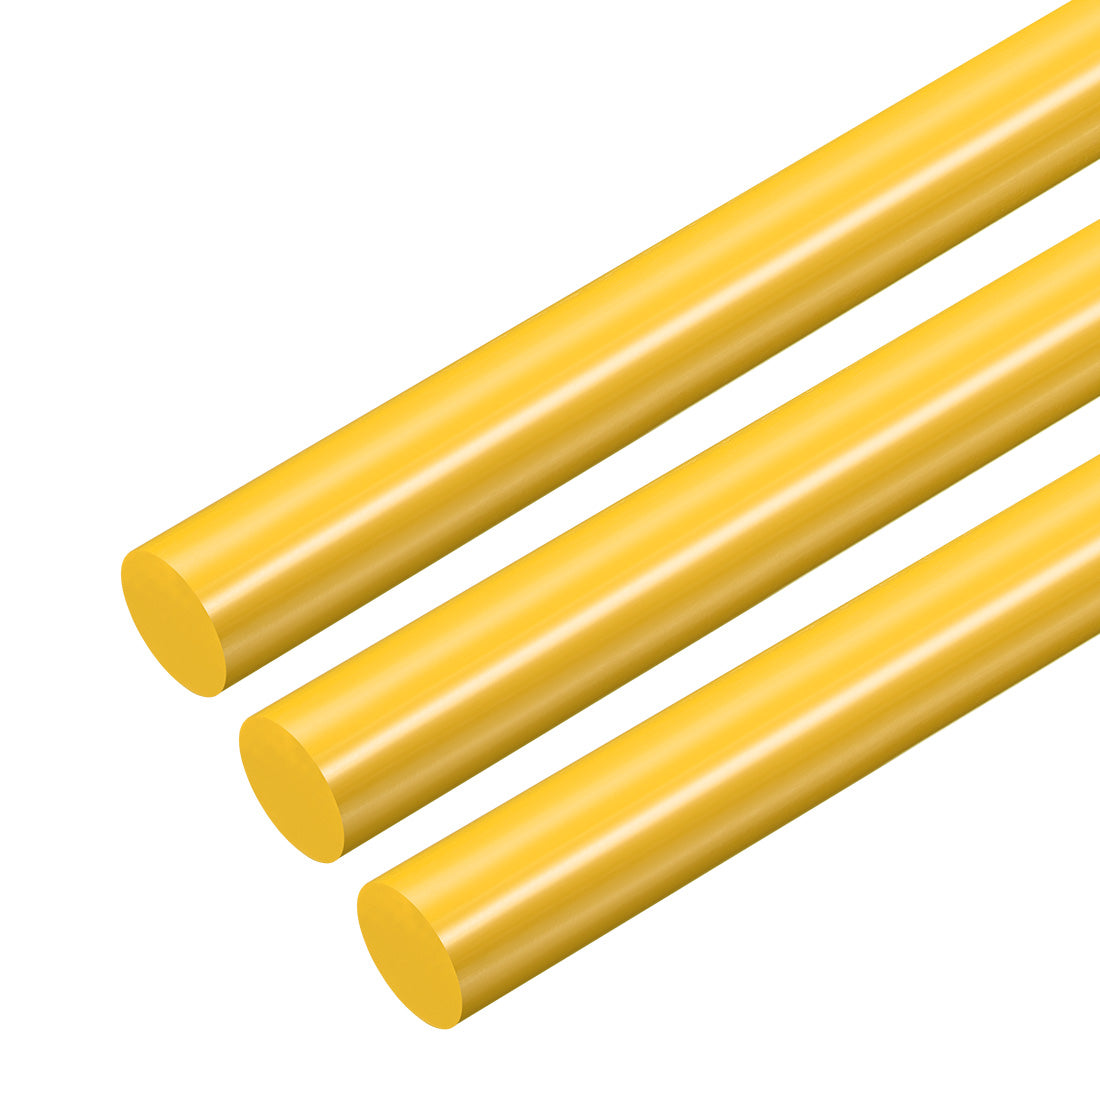 uxcell Uxcell Plastic Round Rod,15mm Dia 50cm Yellow Engineering Plastic Round Bar 3pcs